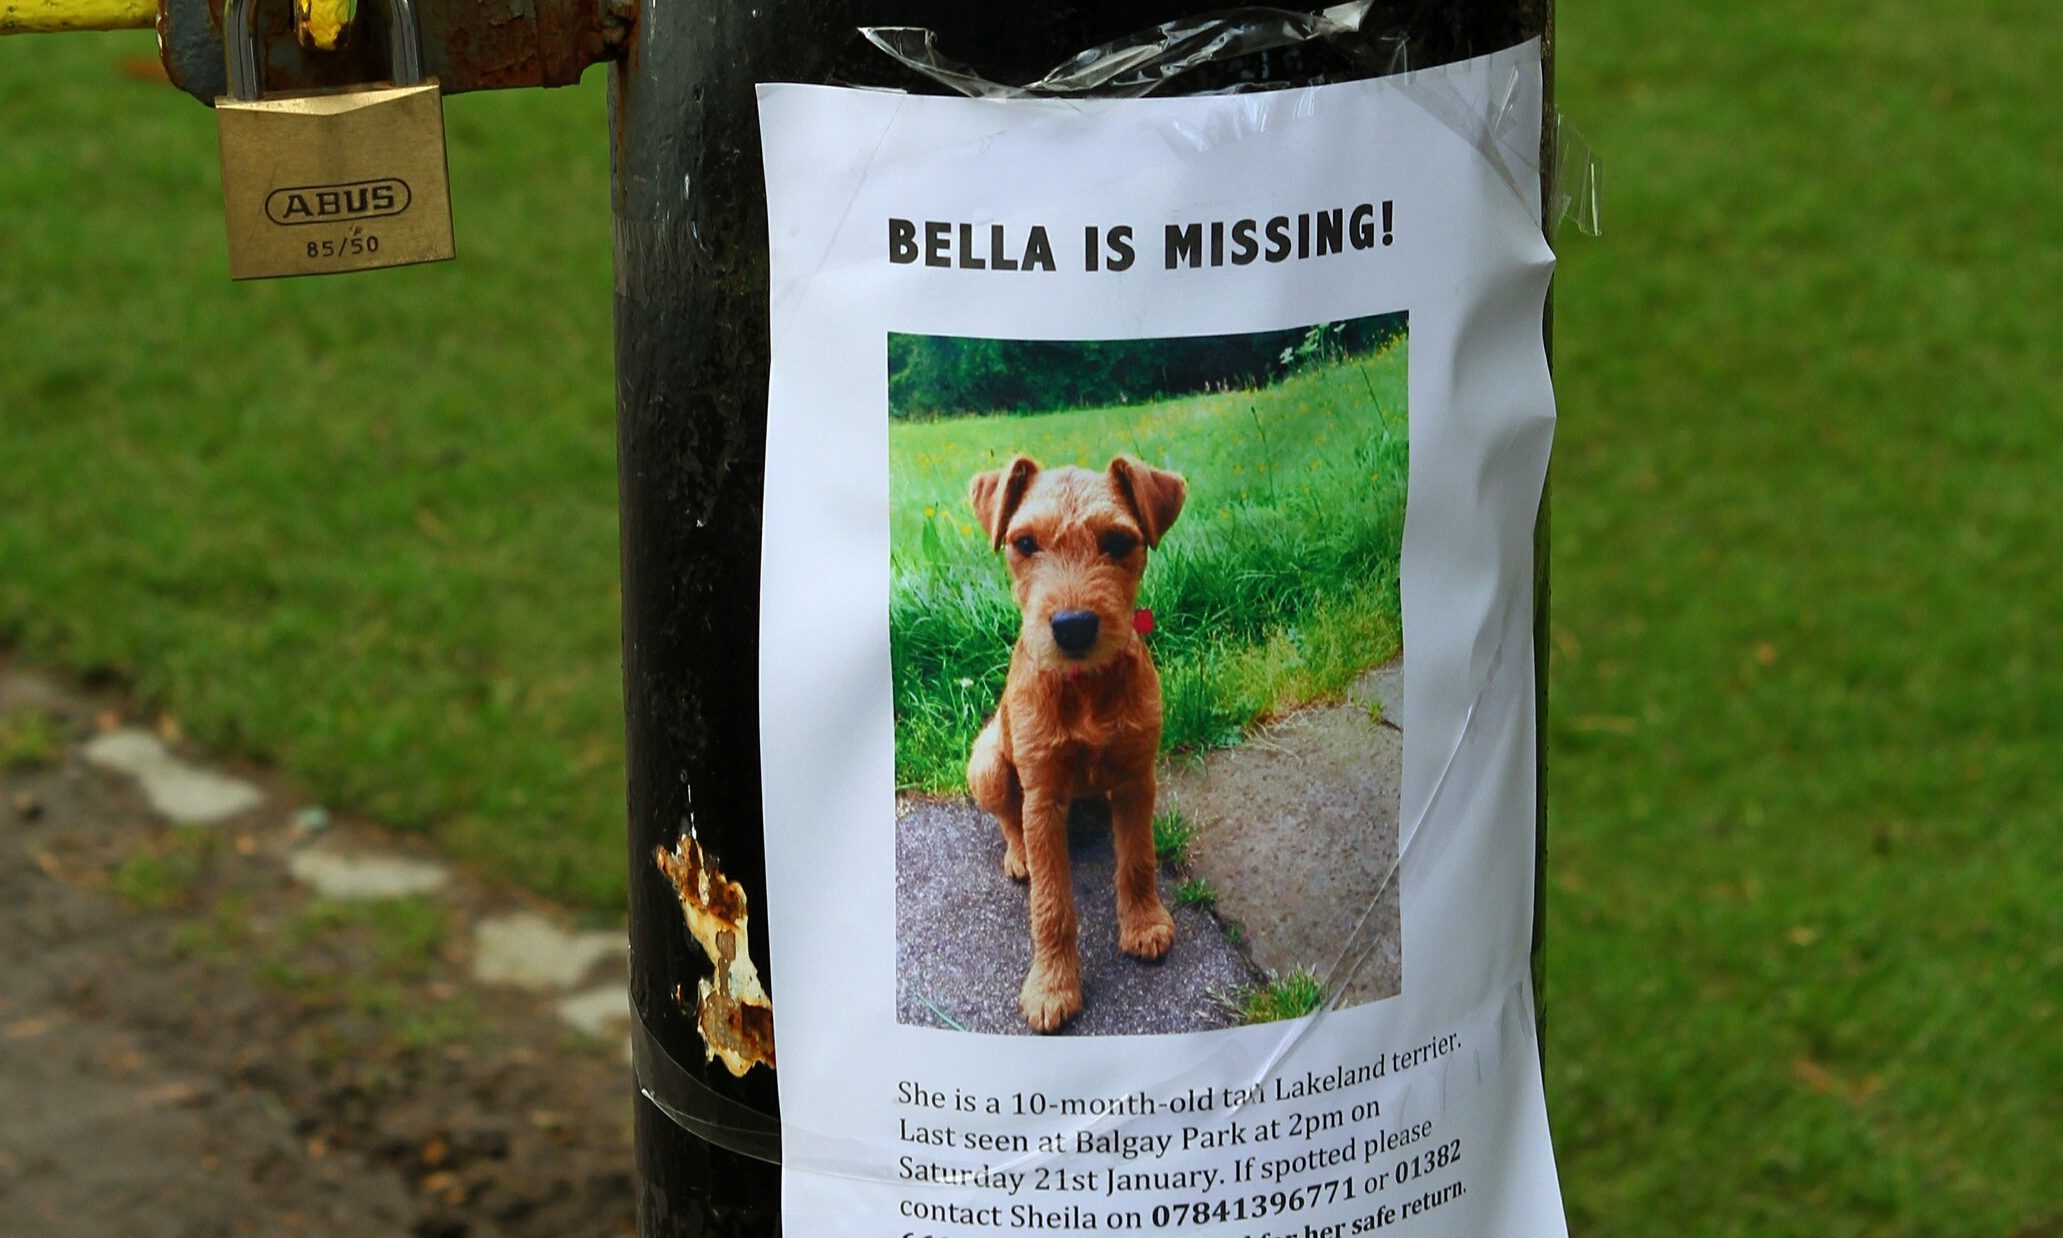 Credible sightings of Bella have been reported in the last 48 hours.